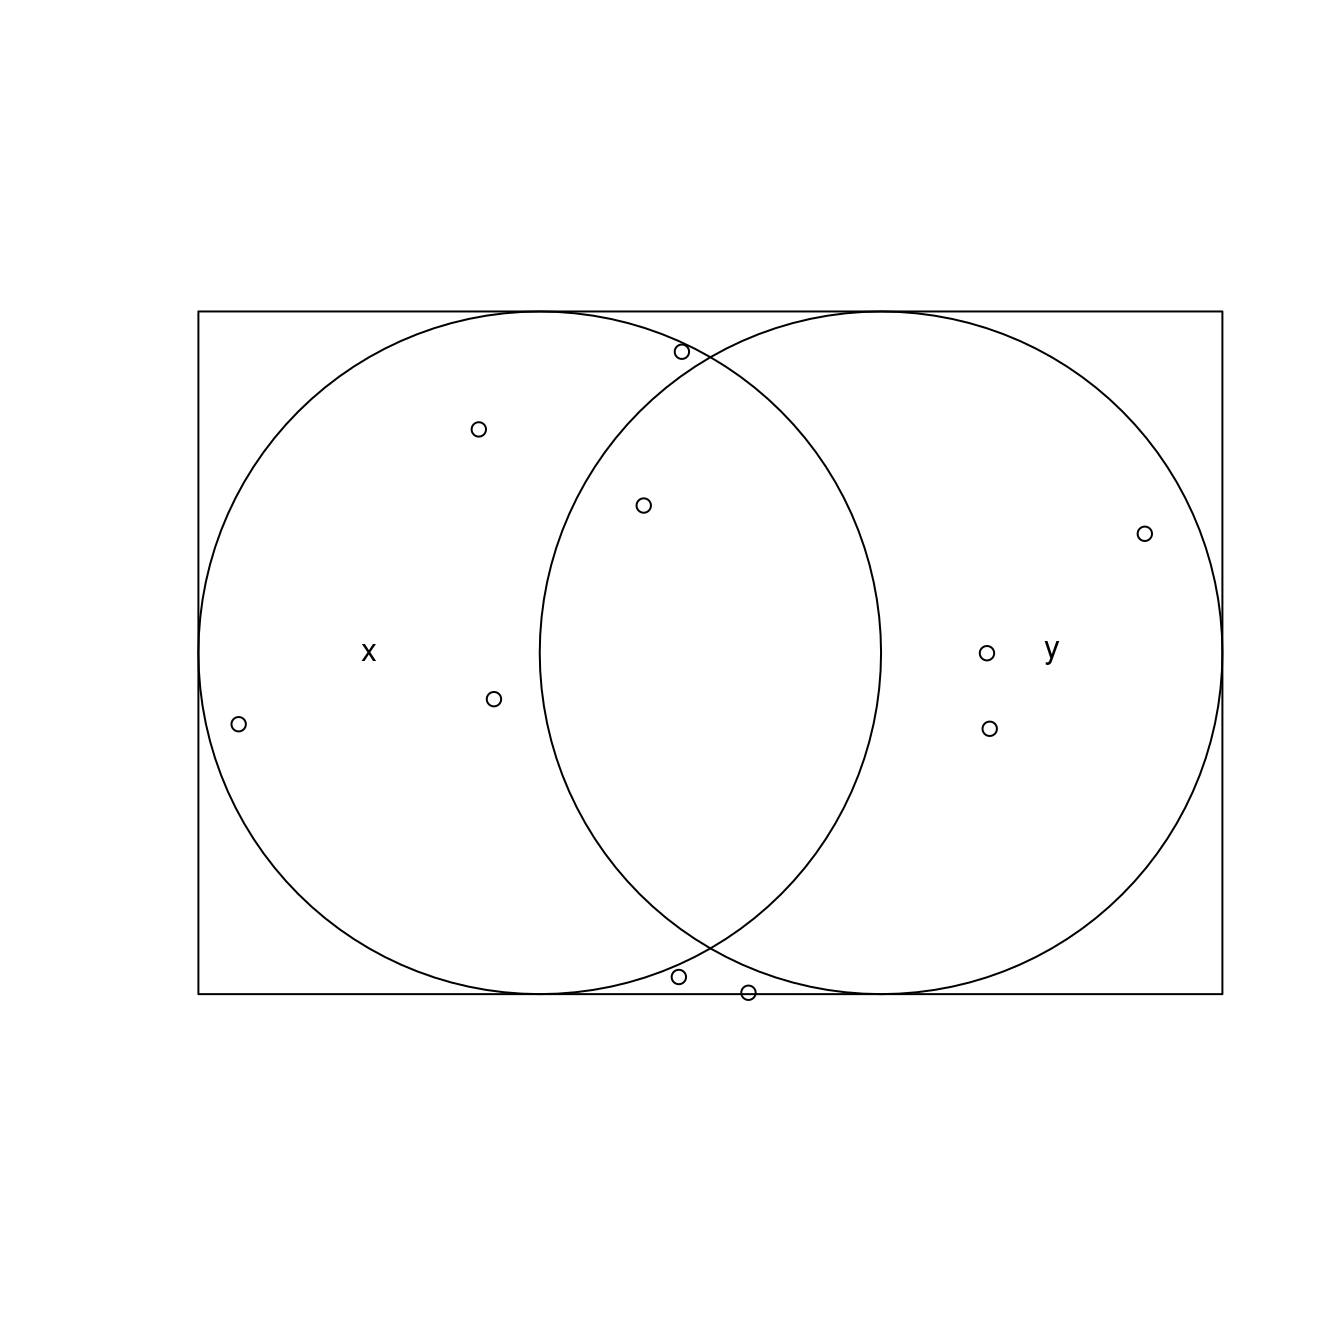 Randomly distributed points within the bounding box enclosing circles x and y.